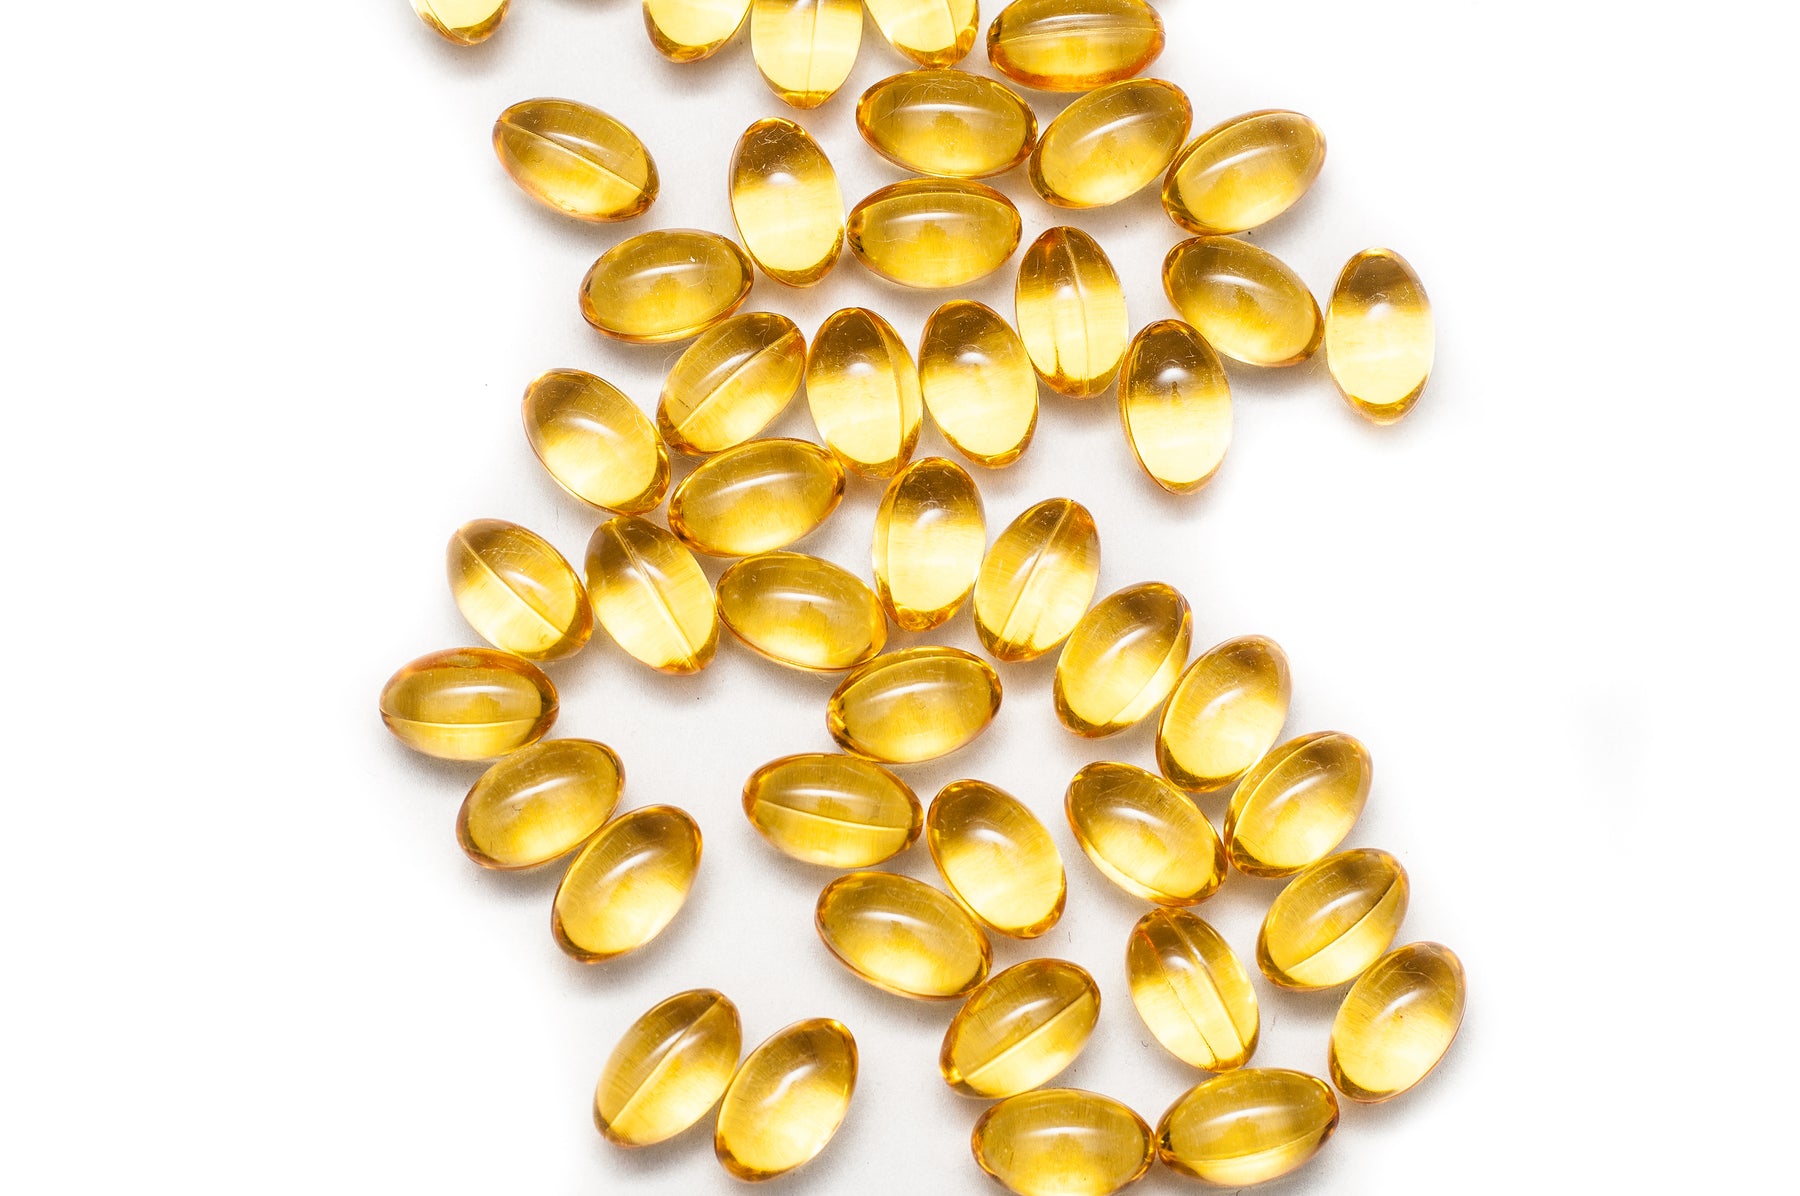 Increased Omega-3 Fatty Acid Levels Associated With Reduction in Hip Fracture Risk